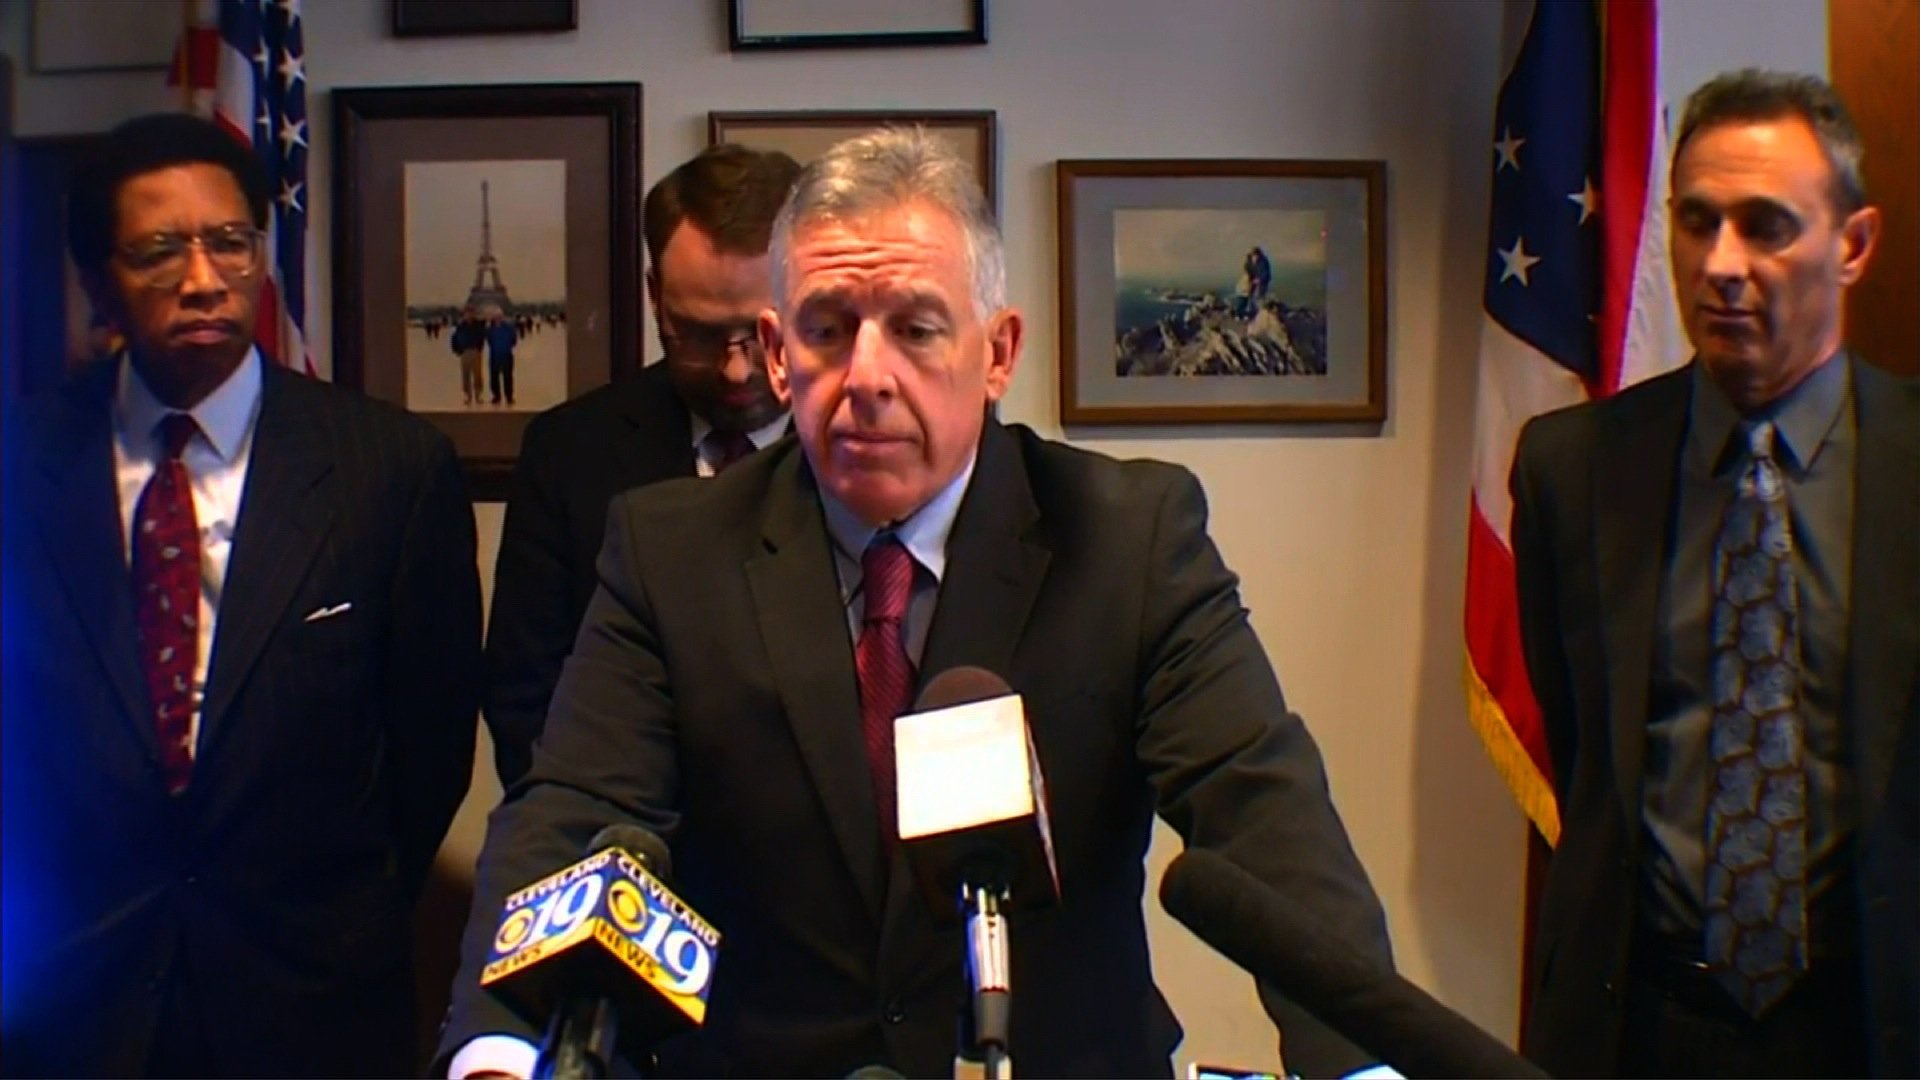 **Embargo: Cleveland-Akron, OH**


Cuyahoga County prosecutor Tim McGinty announces an Ohio grand jury has decided not to return an indictment in the 2014 police shooting death of 12-year-old Tamir Rice.